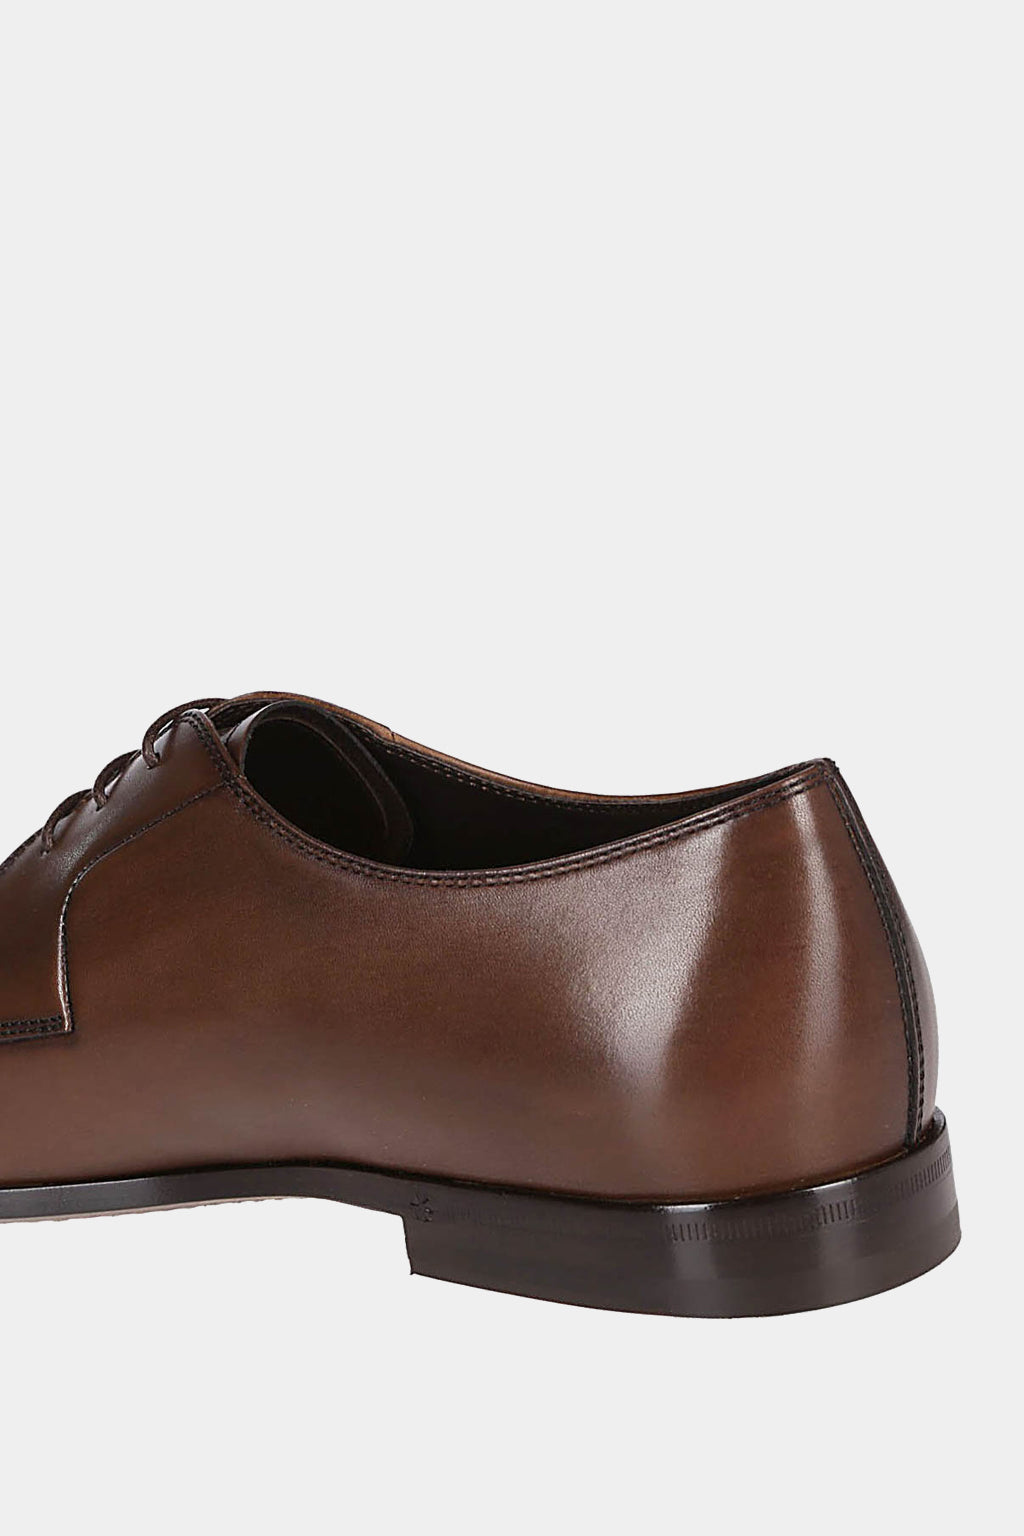 Tod's - Men's Allacciato Leather Lace-Up Derby